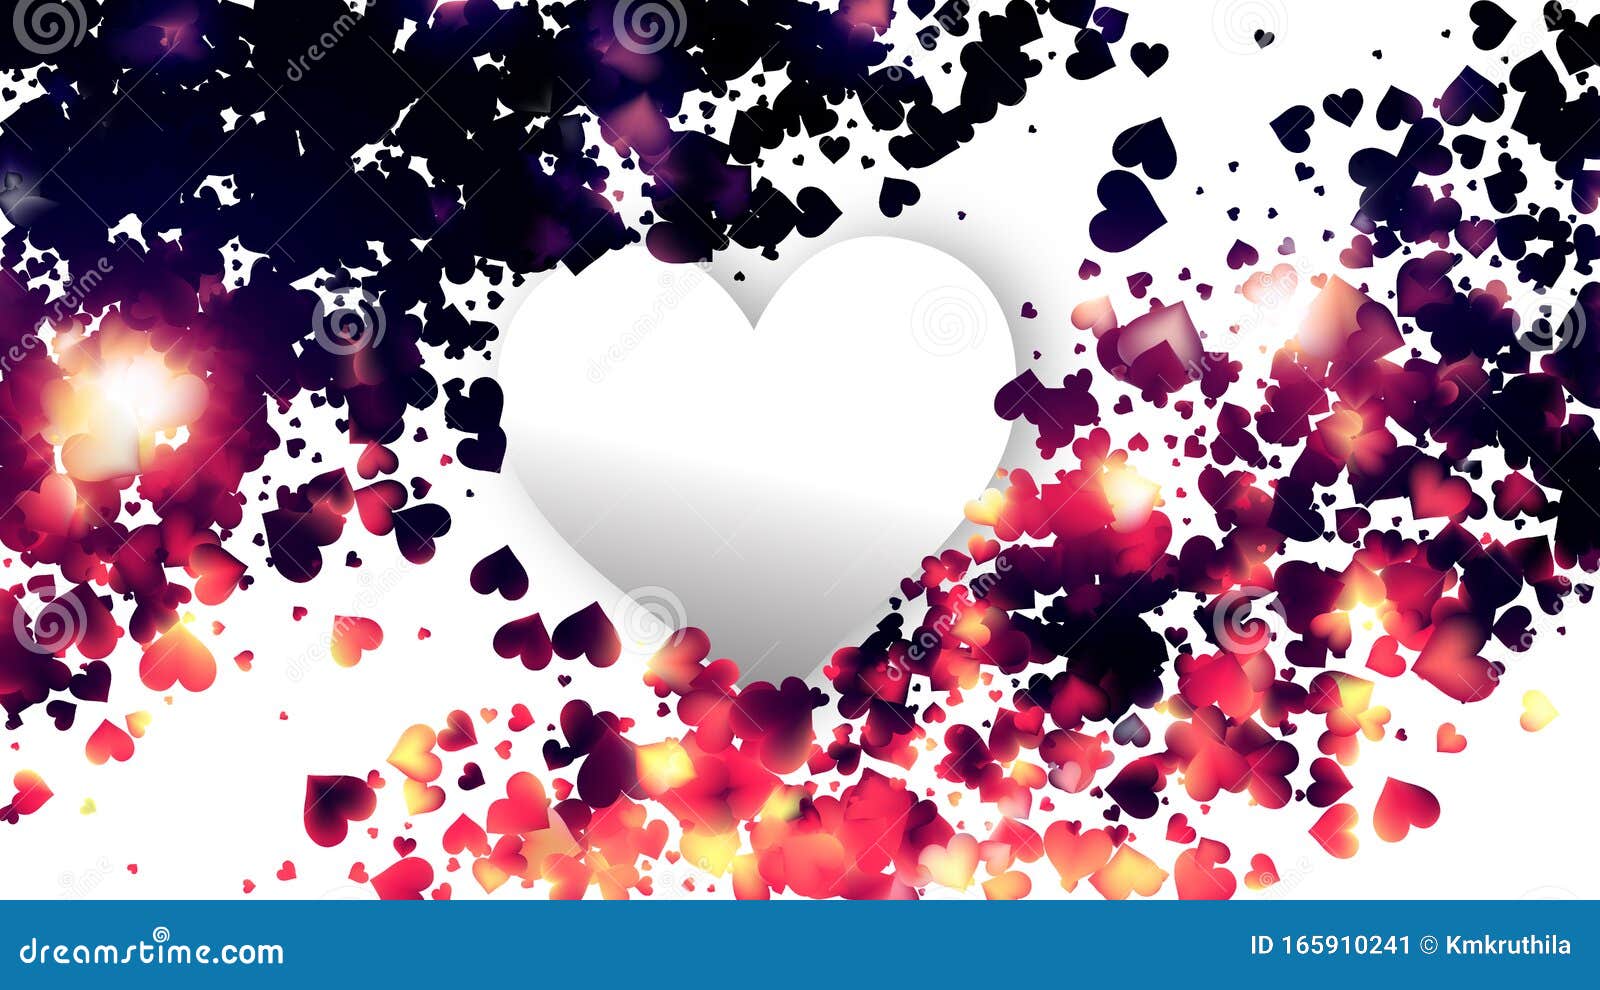 Black and White Heart Wallpaper 55 pictures